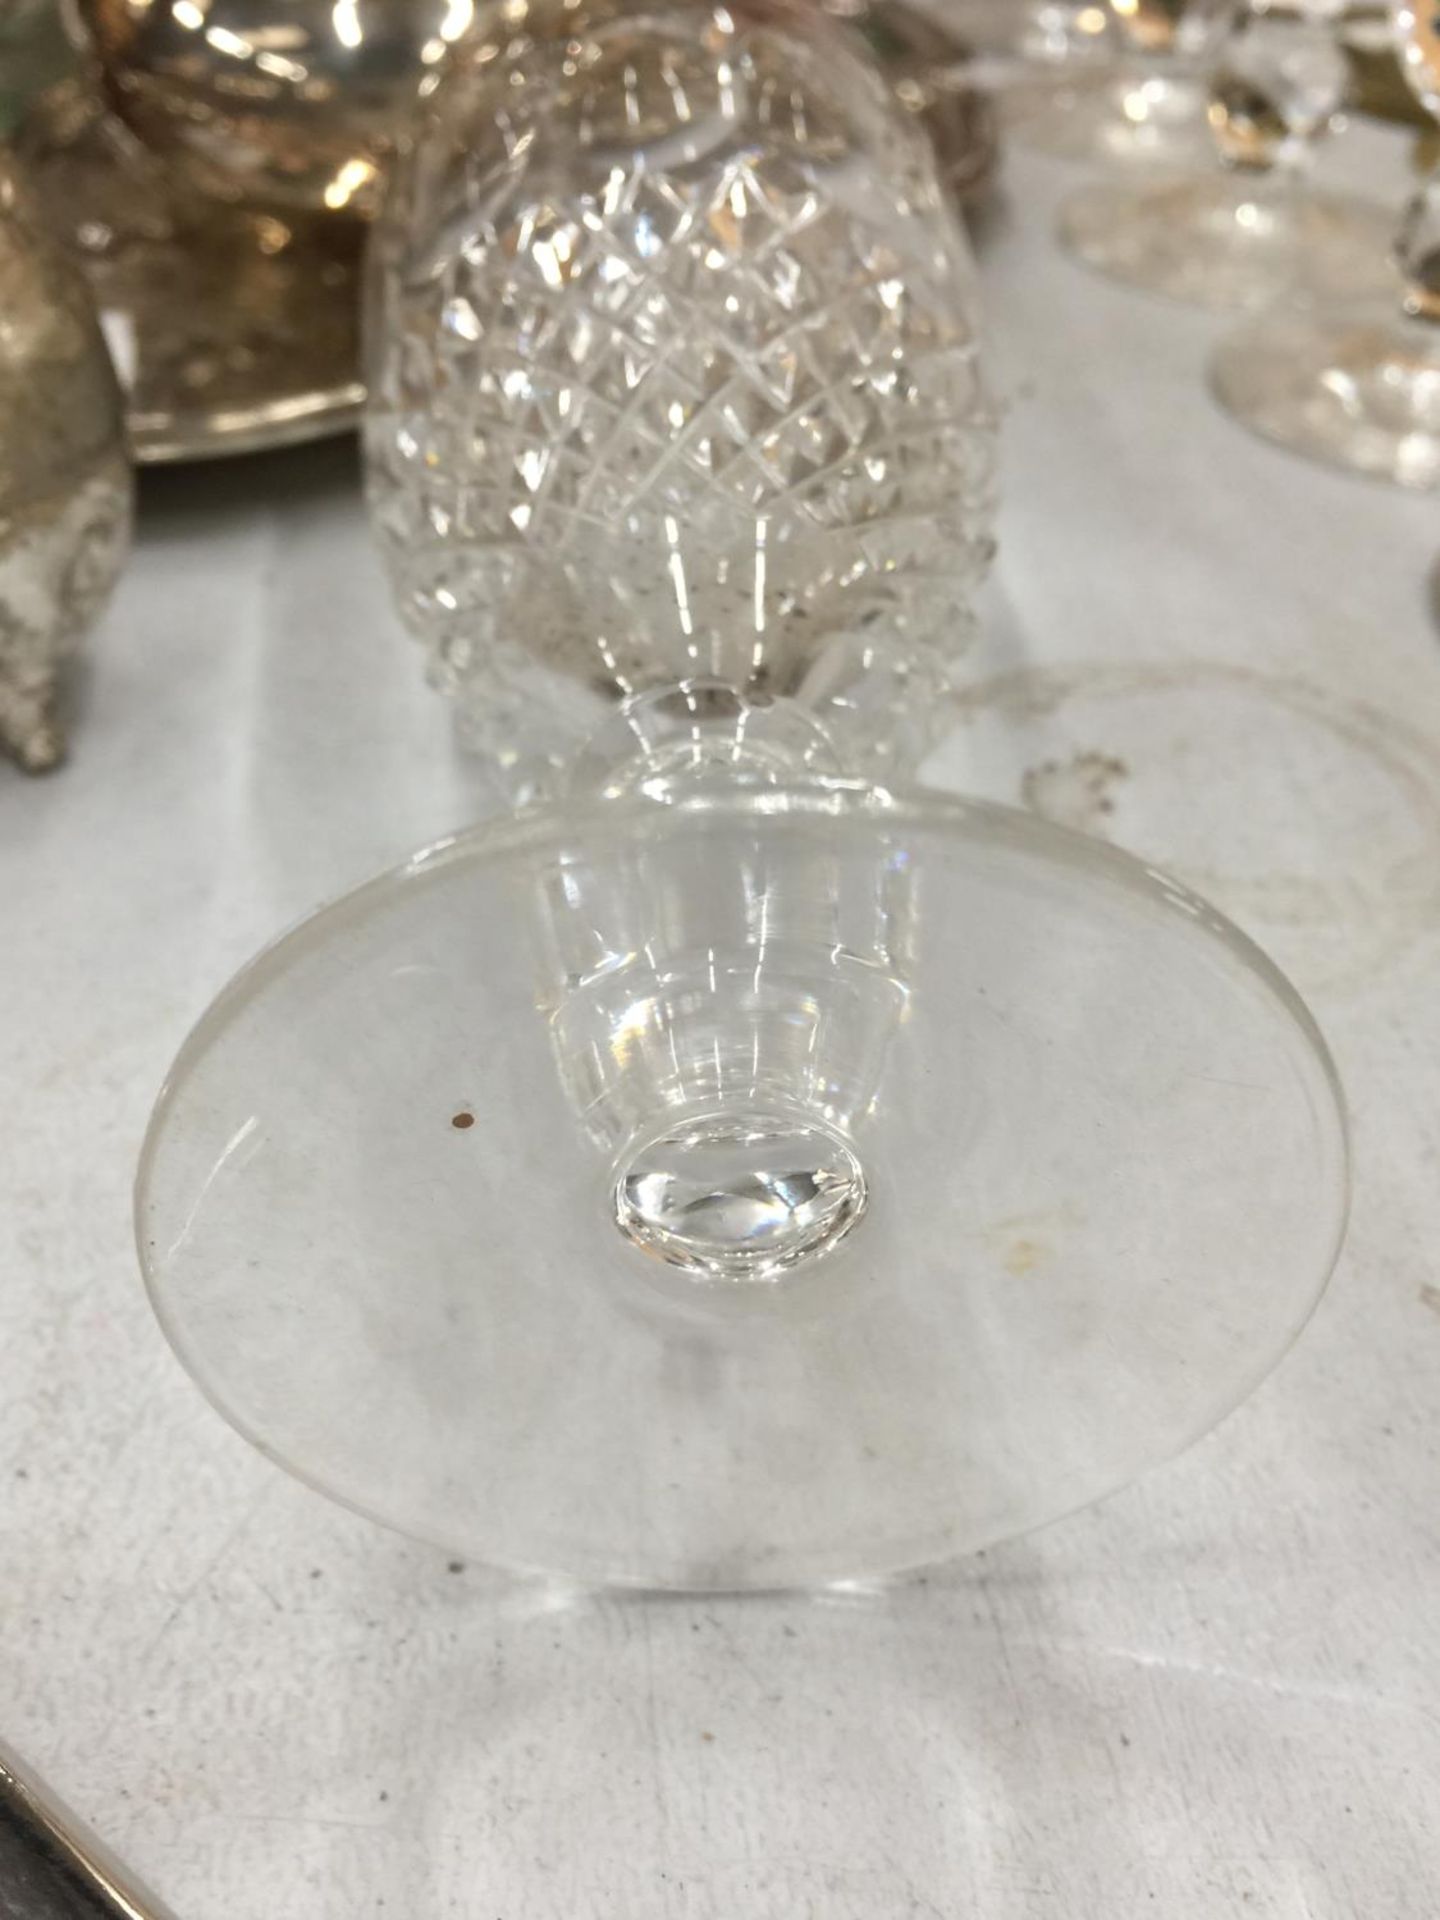 SIX WATERFORD CRYSTAL WINE GLASSES - Image 3 of 3